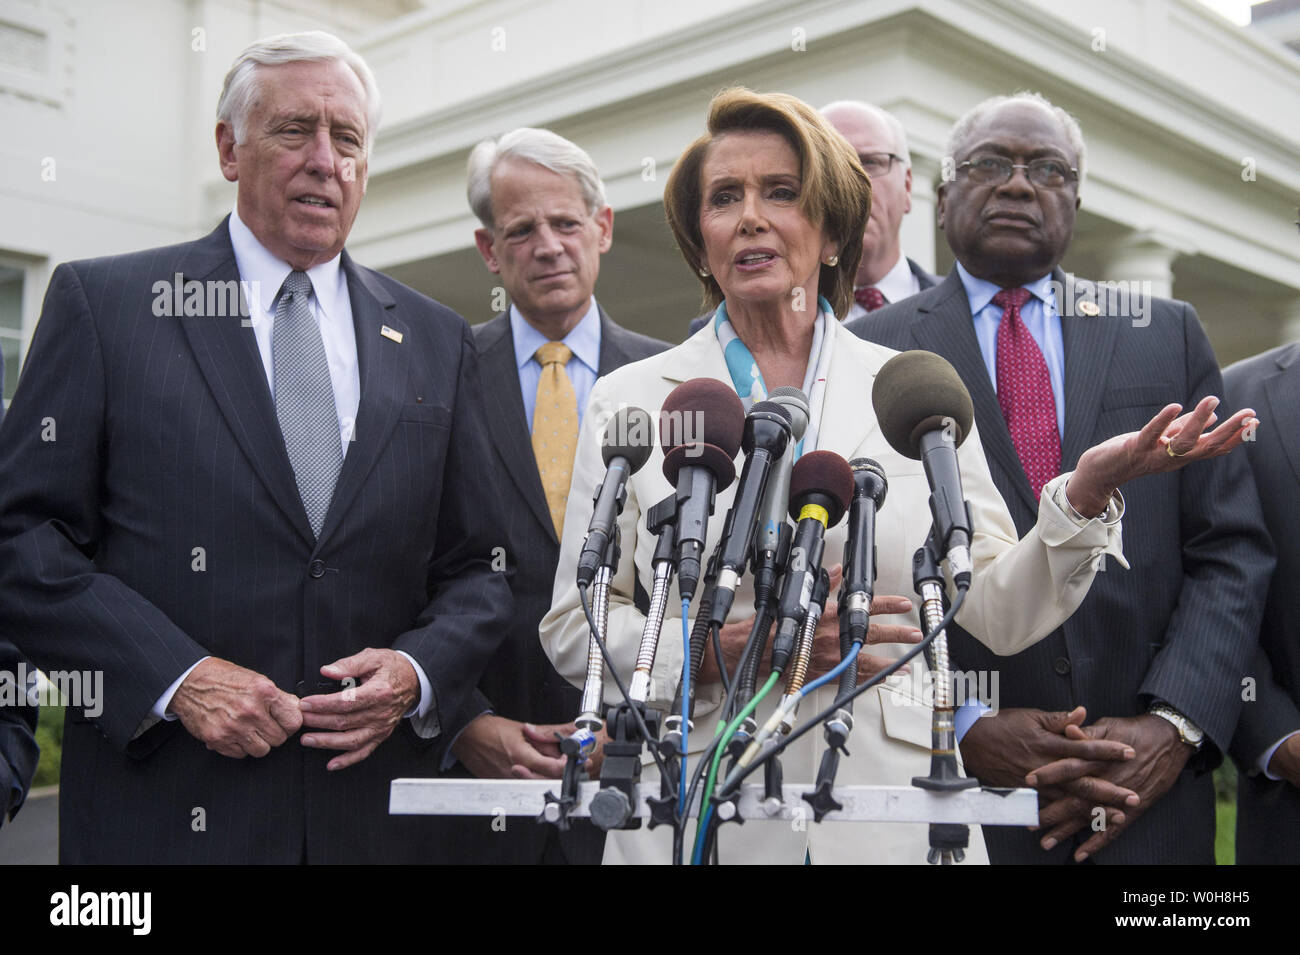 House Minority Leader Nancy Pelosi (D-CA) speaks to the media following a meeting with President Barack Obama on the debt limit and reopening the government at the White House in Washington, D.C. on October 15, 2013. Pelosi was joined by House Minority Whip Steny Hoyer (D-MD) (L), Rep. Steve Israel (D-NY) (2nd-L), Rep. Steve Crowley (D-NY) (2nd-R) and Rep. Jame Clyburn (R-SC). UPI/Kevin Dietsch Stock Photo